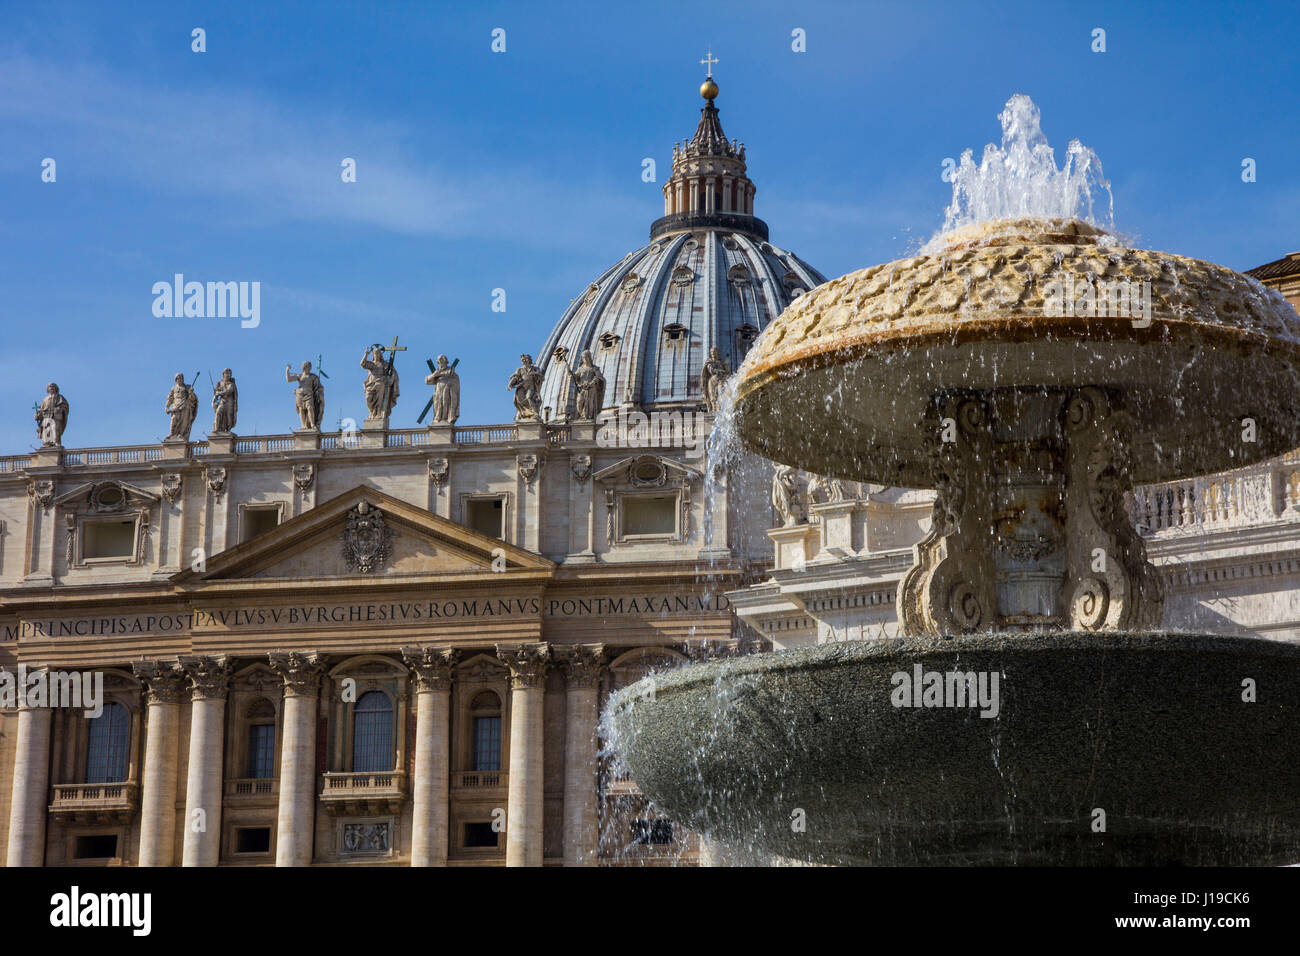 A view of St. Peter's Basilica, with the 1613 marble fountain of Carlo Maderno in the foreground, on St. Peter's Square, Vatican City, Rome, Italy. Stock Photo